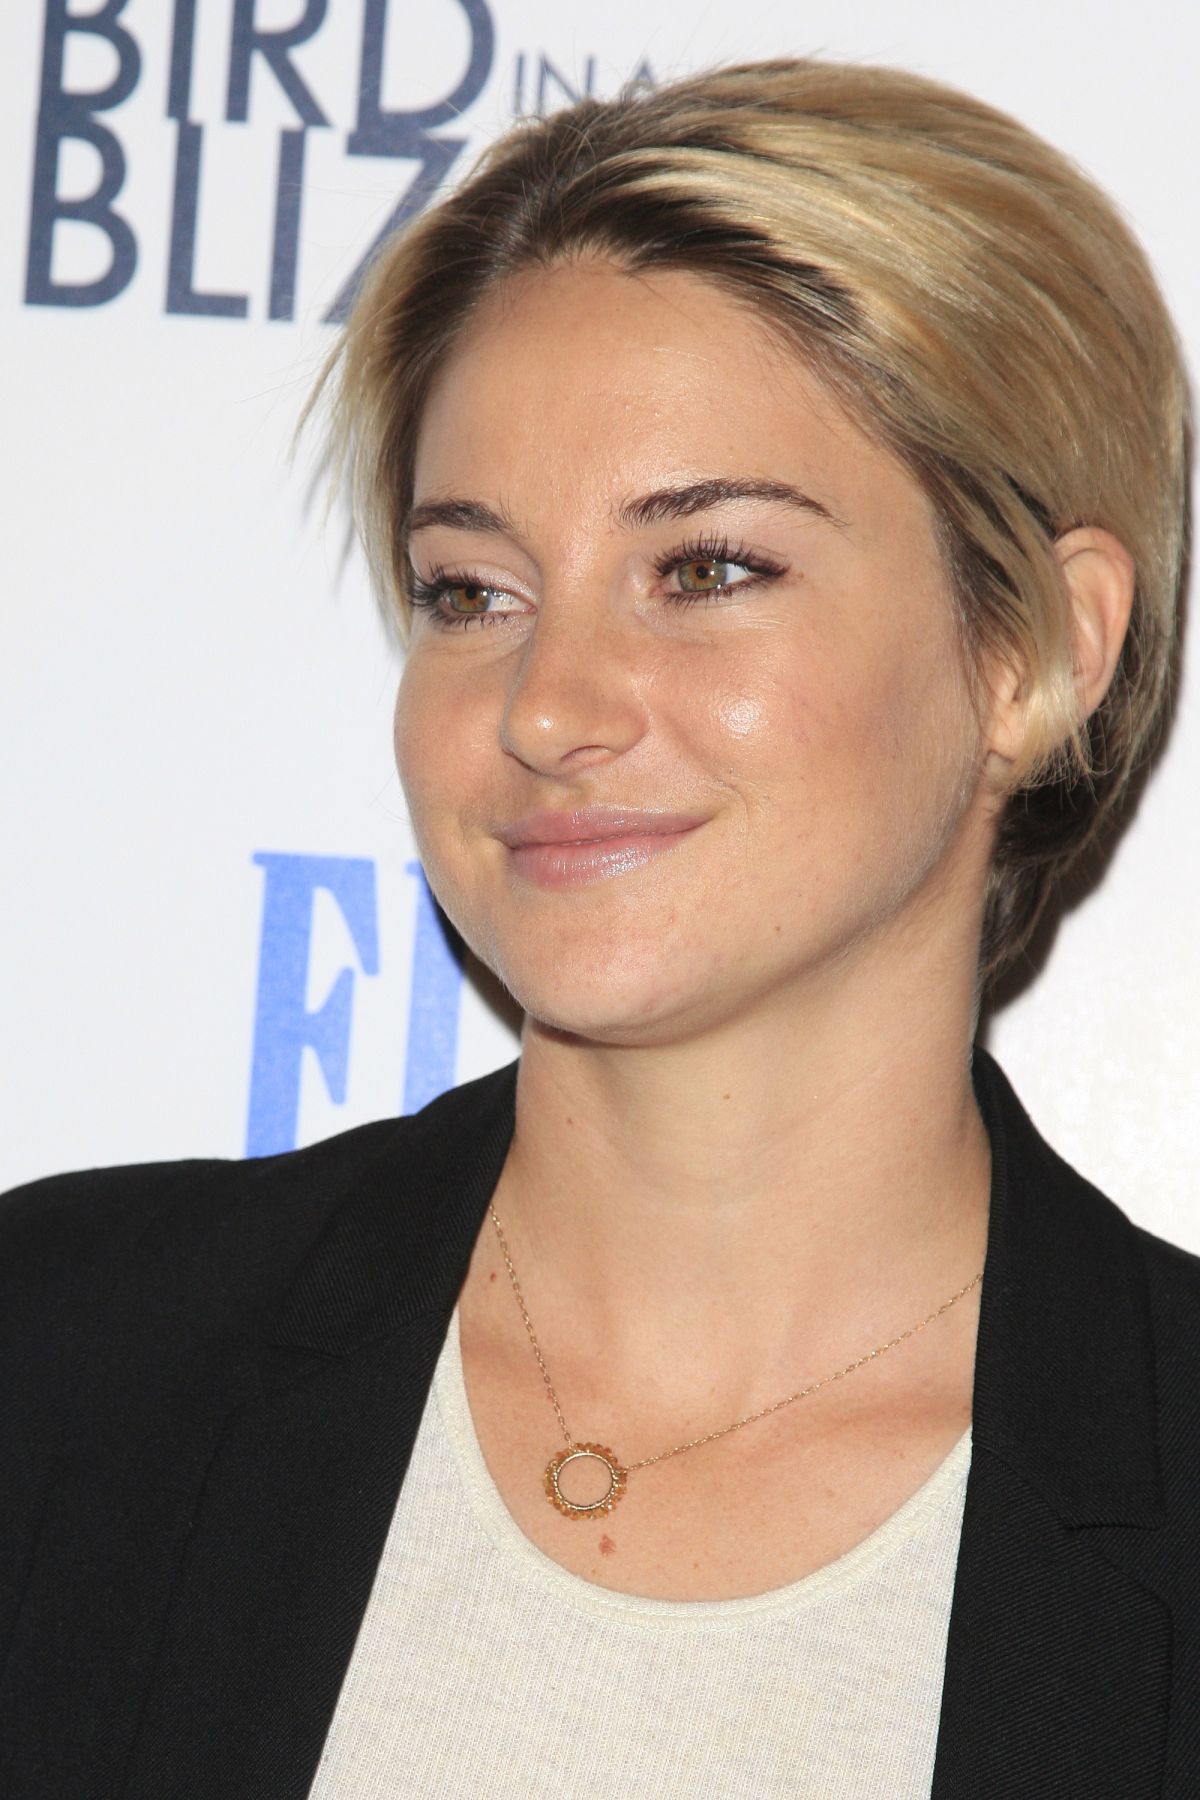 Shailene Woodley At White Bird In A Blizzard Premiere In Los Angeles 3 